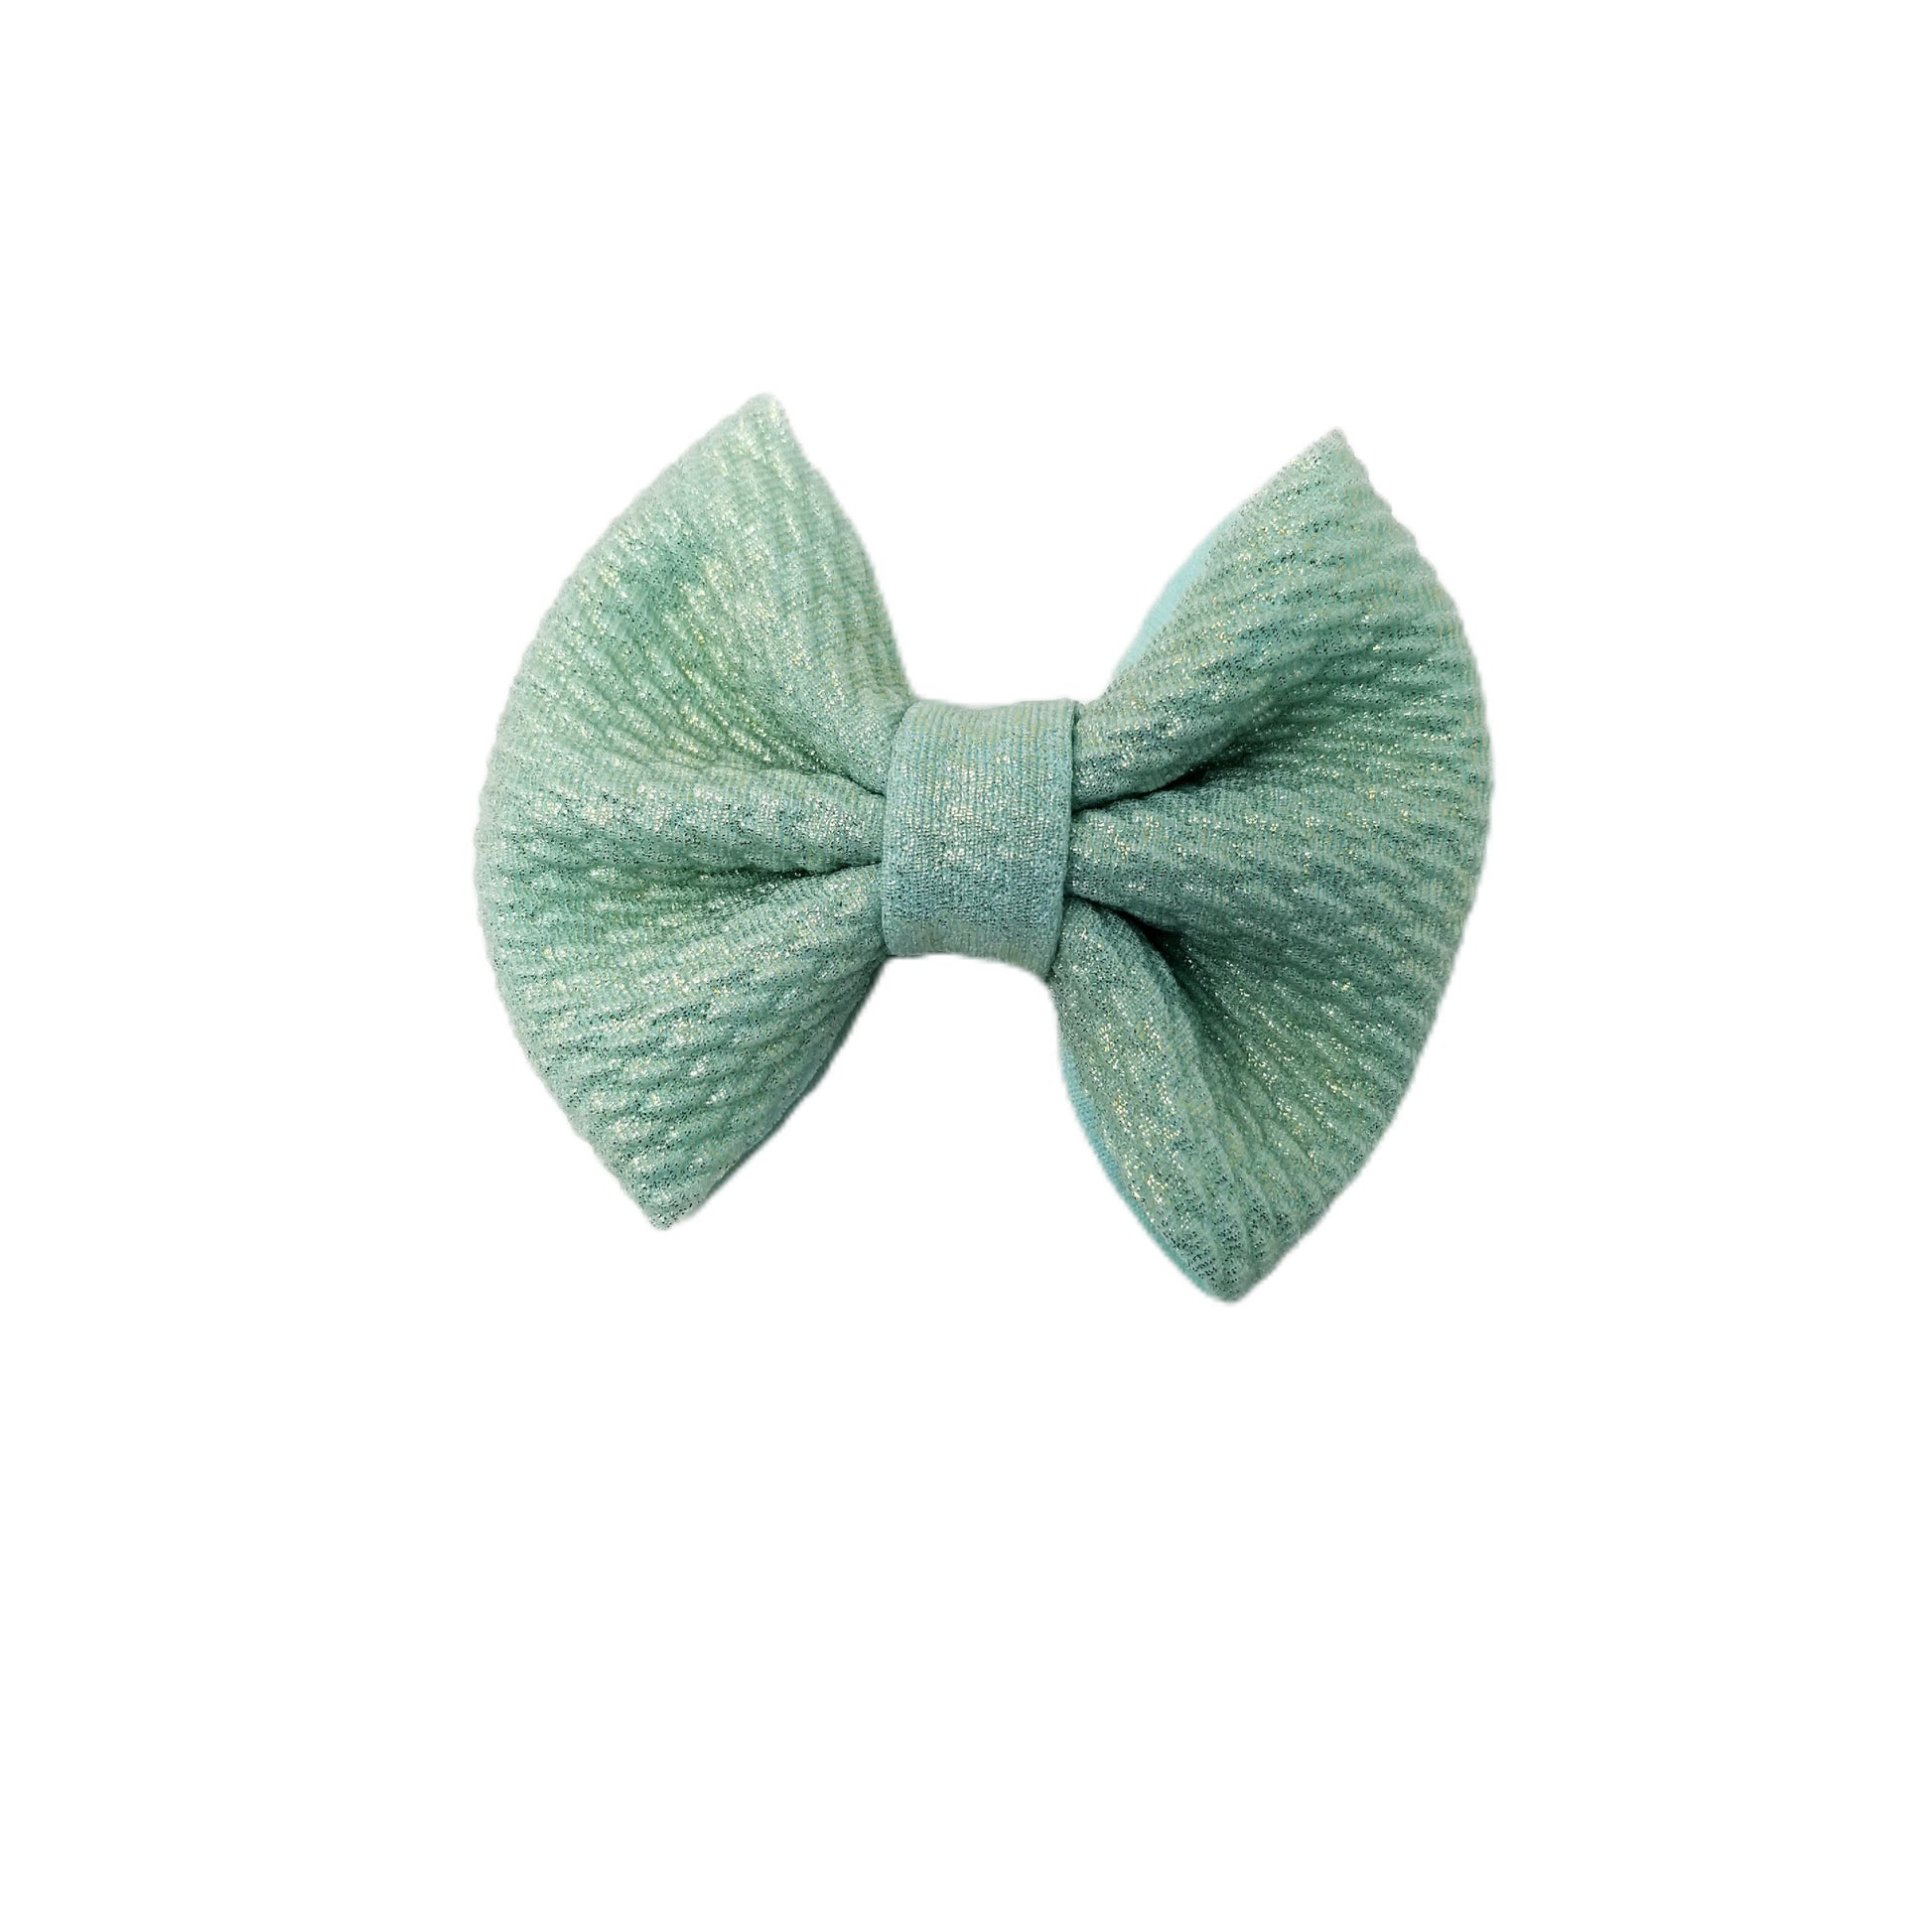 3 inch Mint Shimmer Fabric Bow